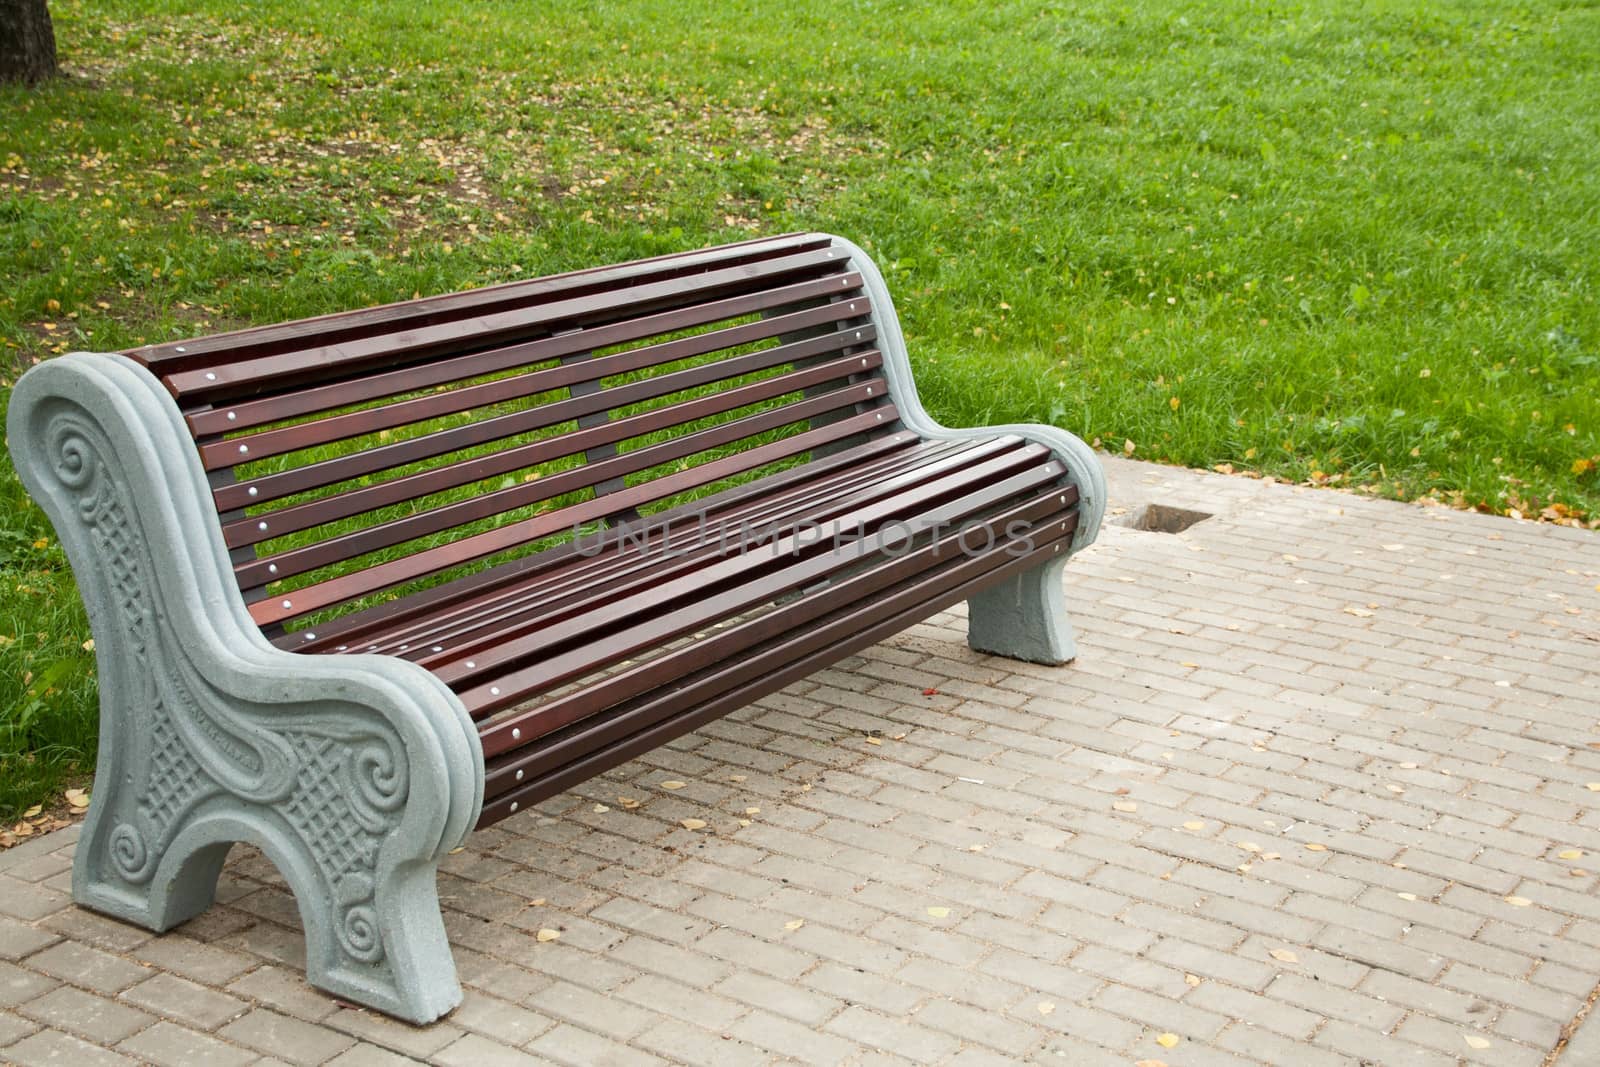 Empty wooden bench in the city park